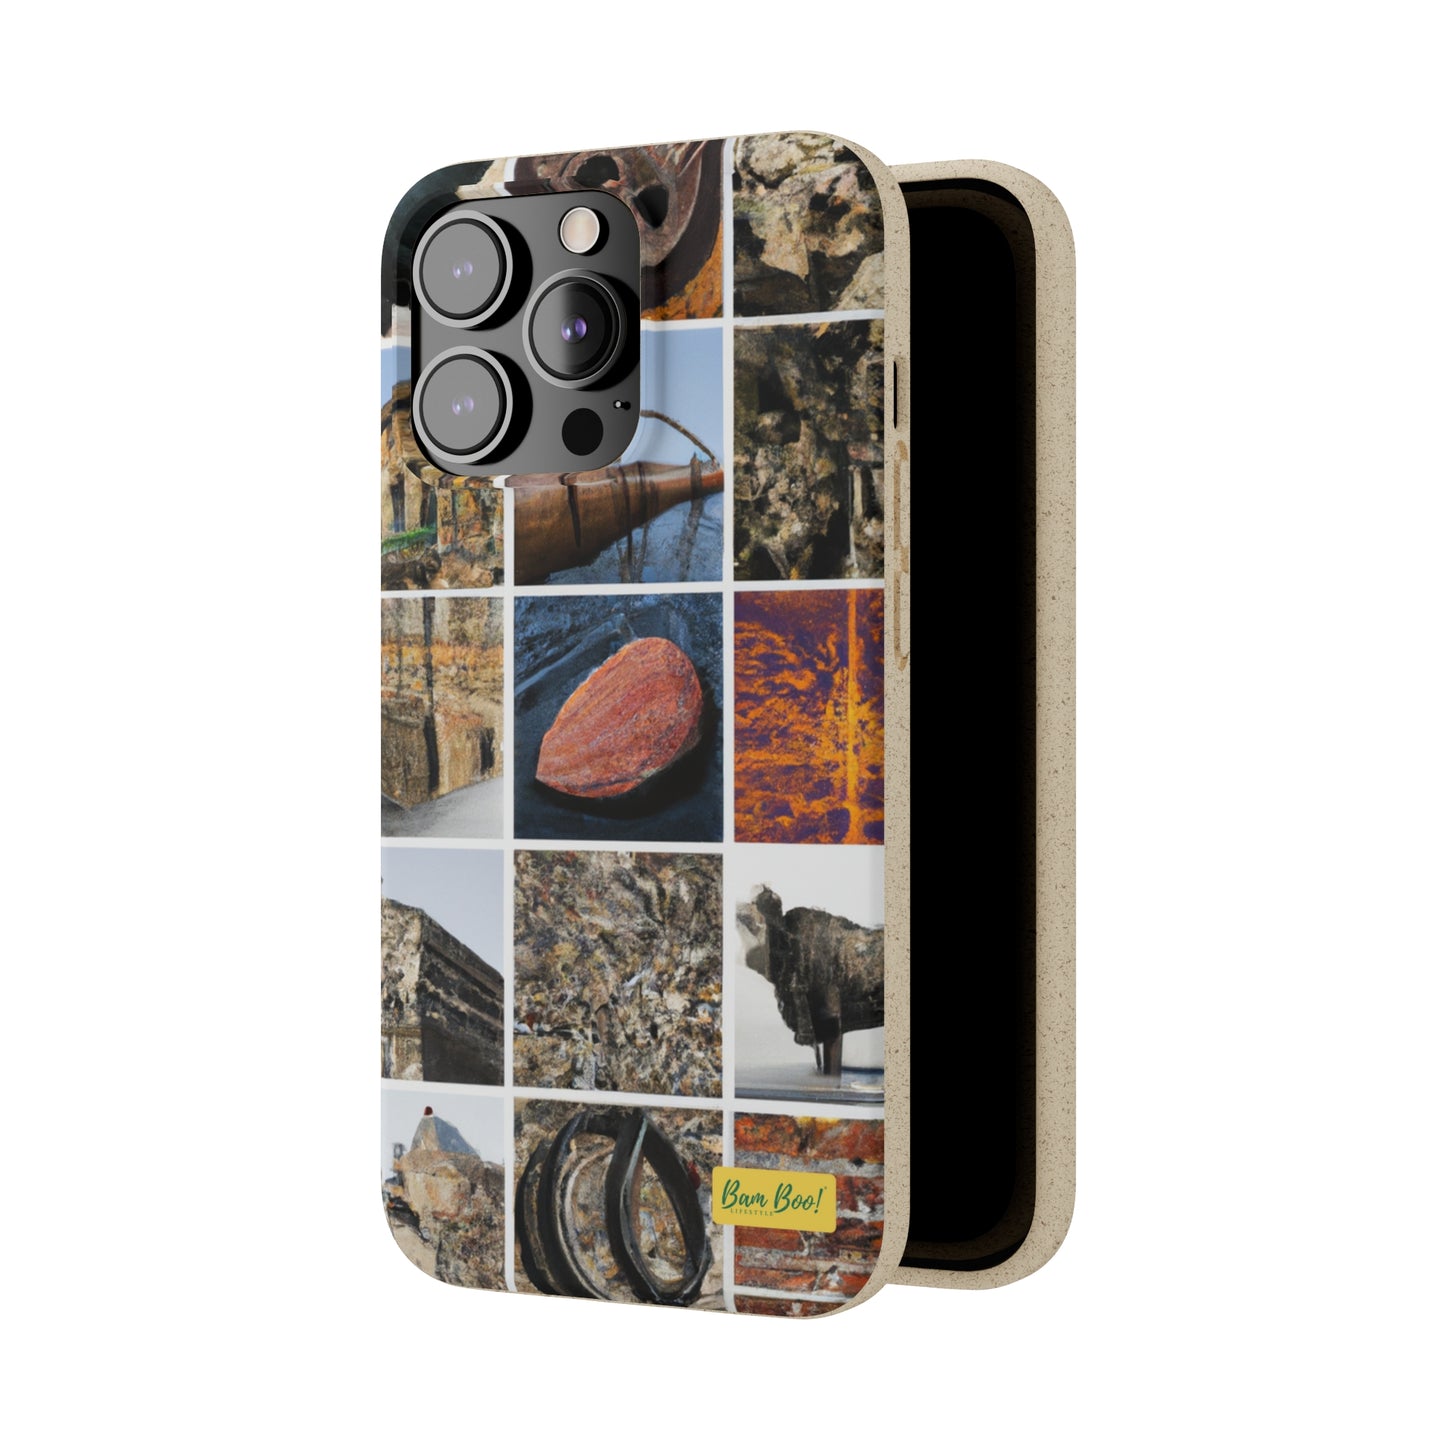 "Exploring the Meaning of.... through Collage" - Bam Boo! Lifestyle Eco-friendly Cases